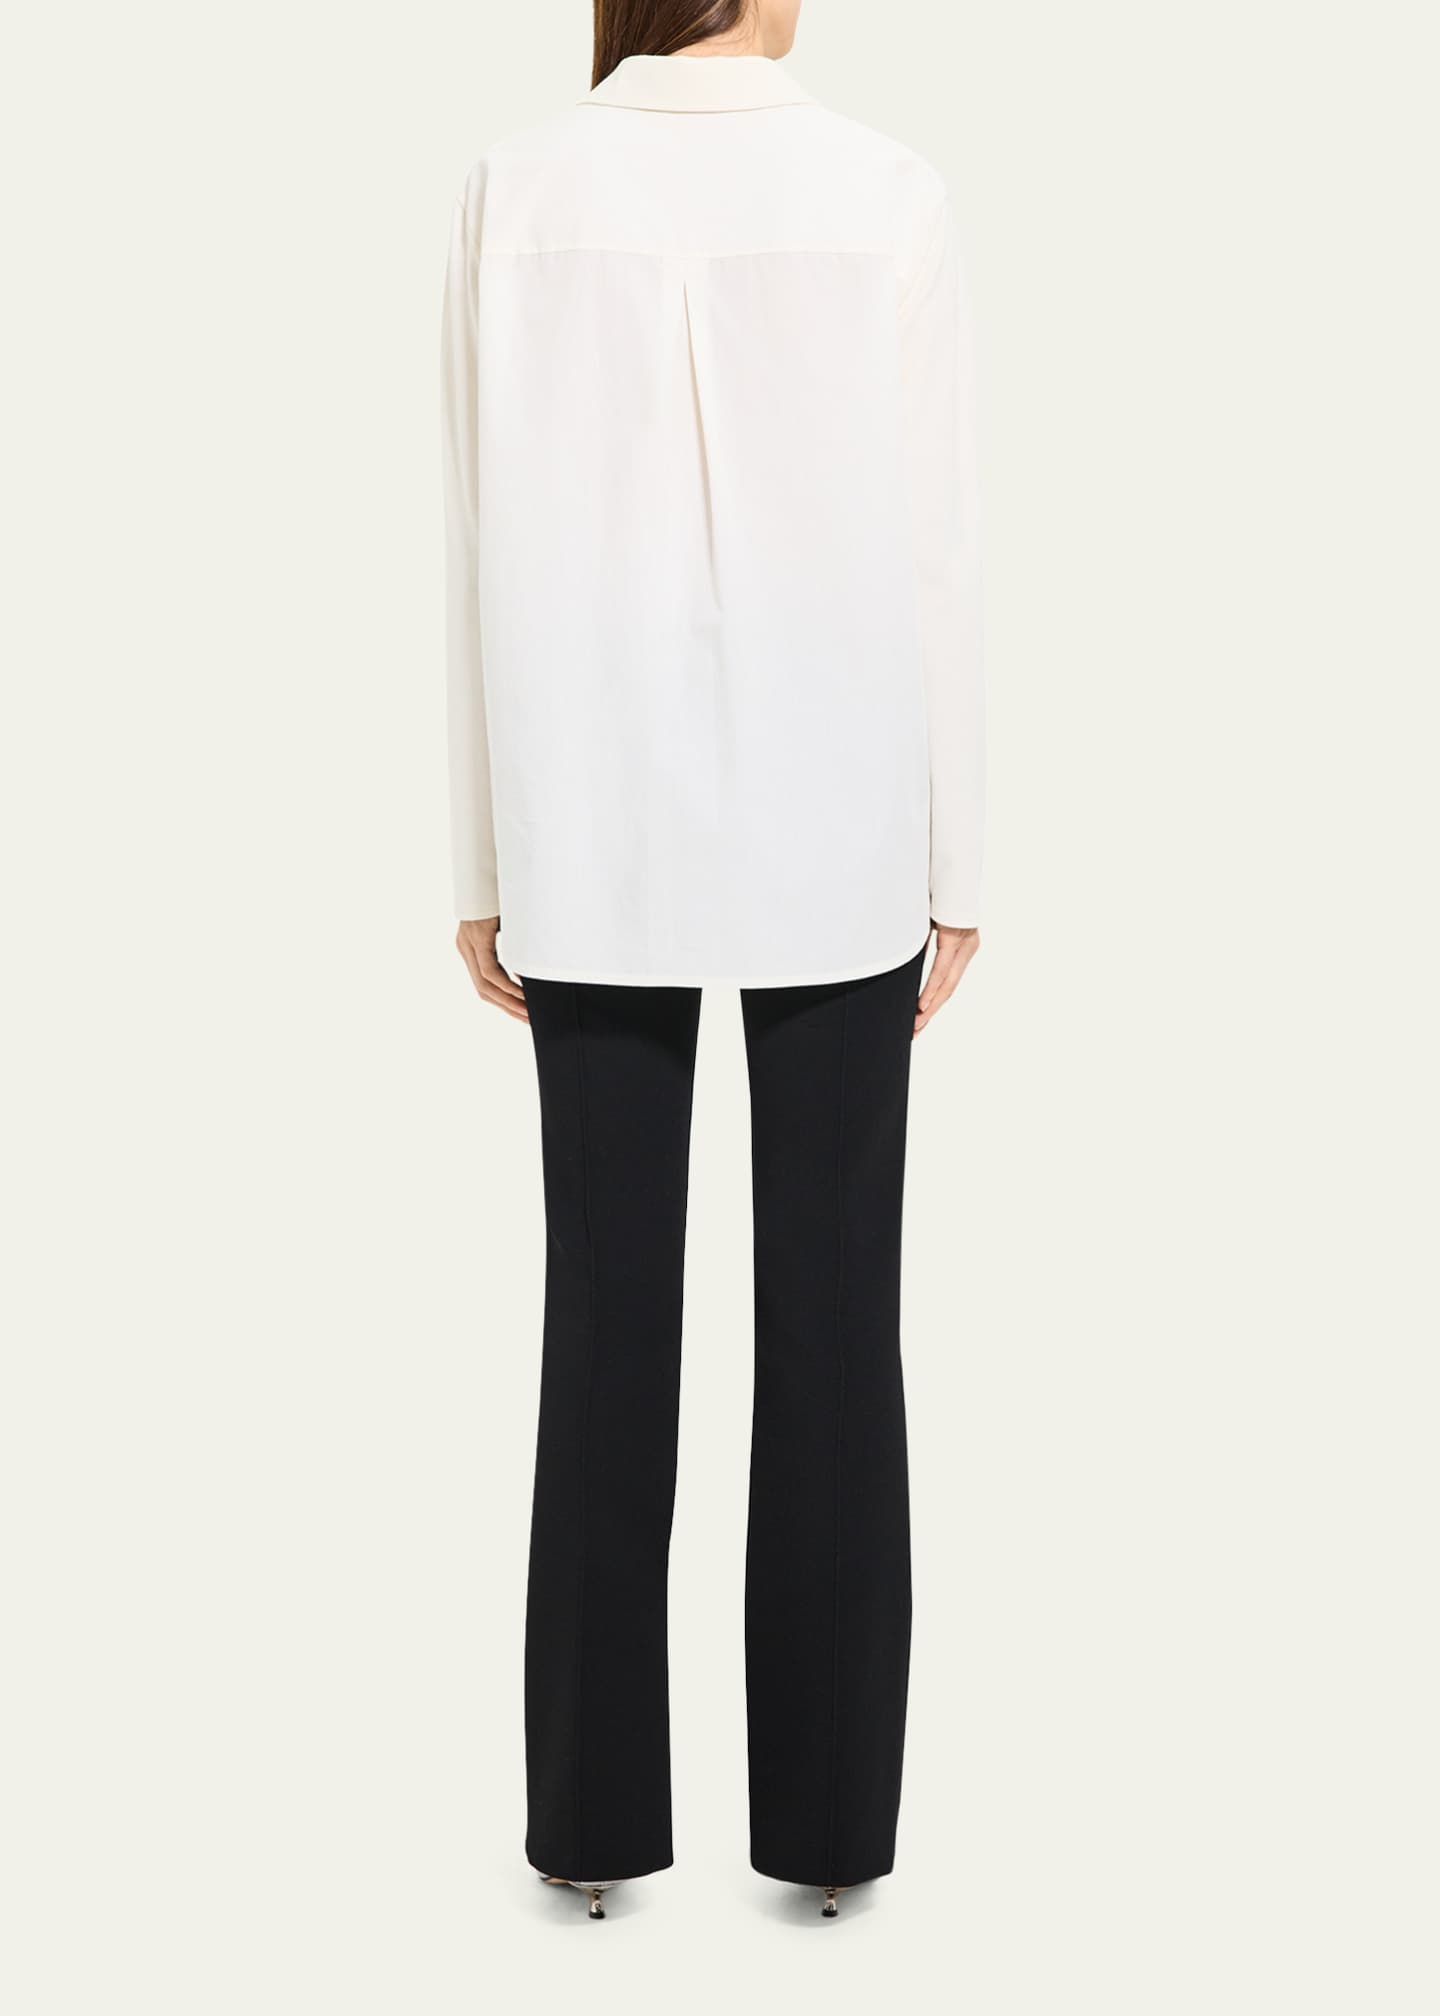 Theory Combed Cotton Long-Sleeve Popover Shirt - Bergdorf Goodman